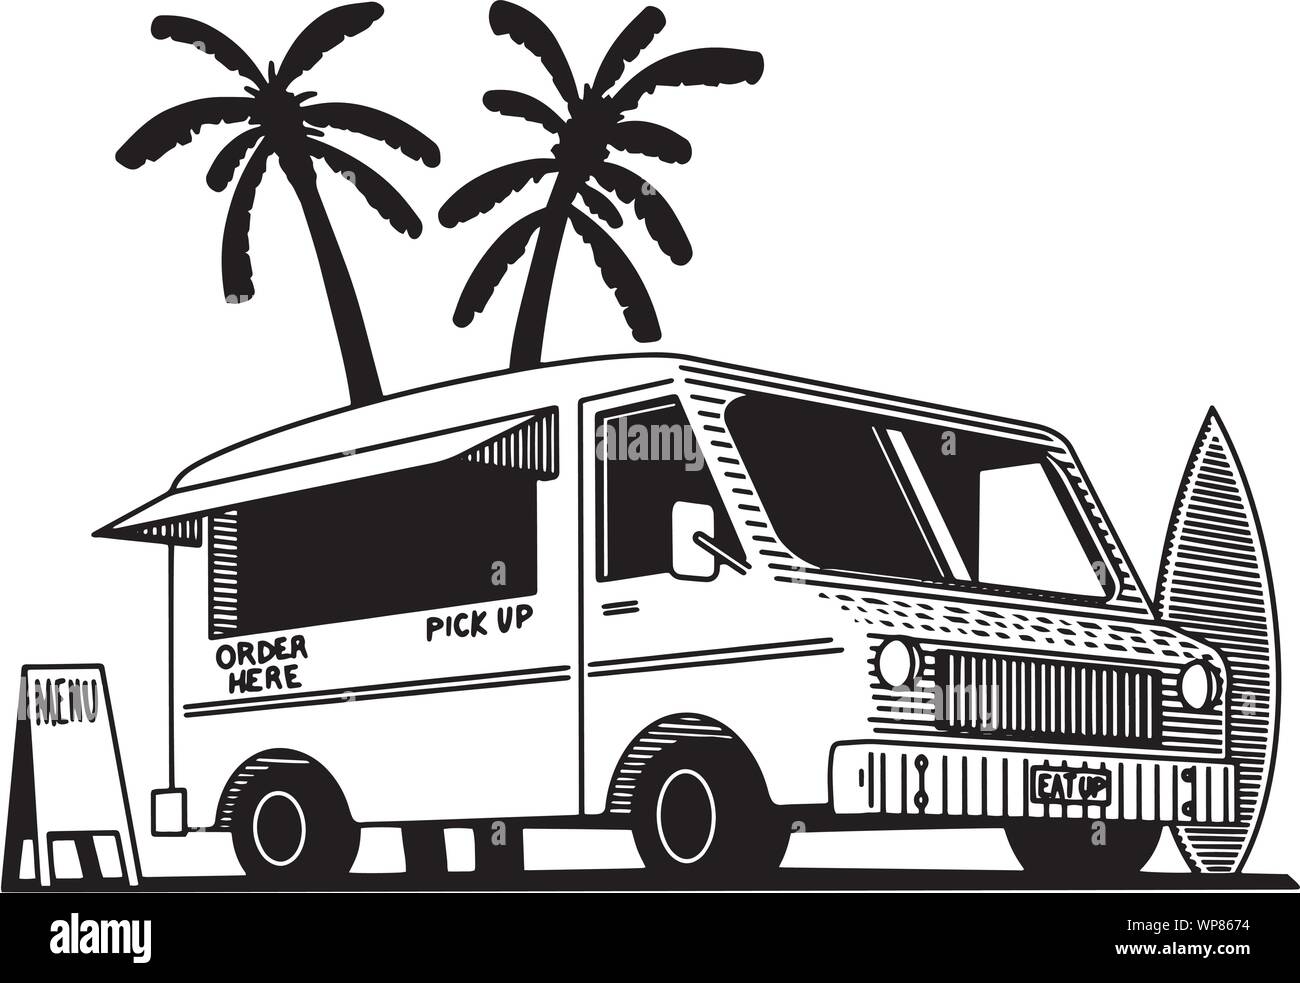 Illustration of a food truck with palm trees in the background. Stock Vector